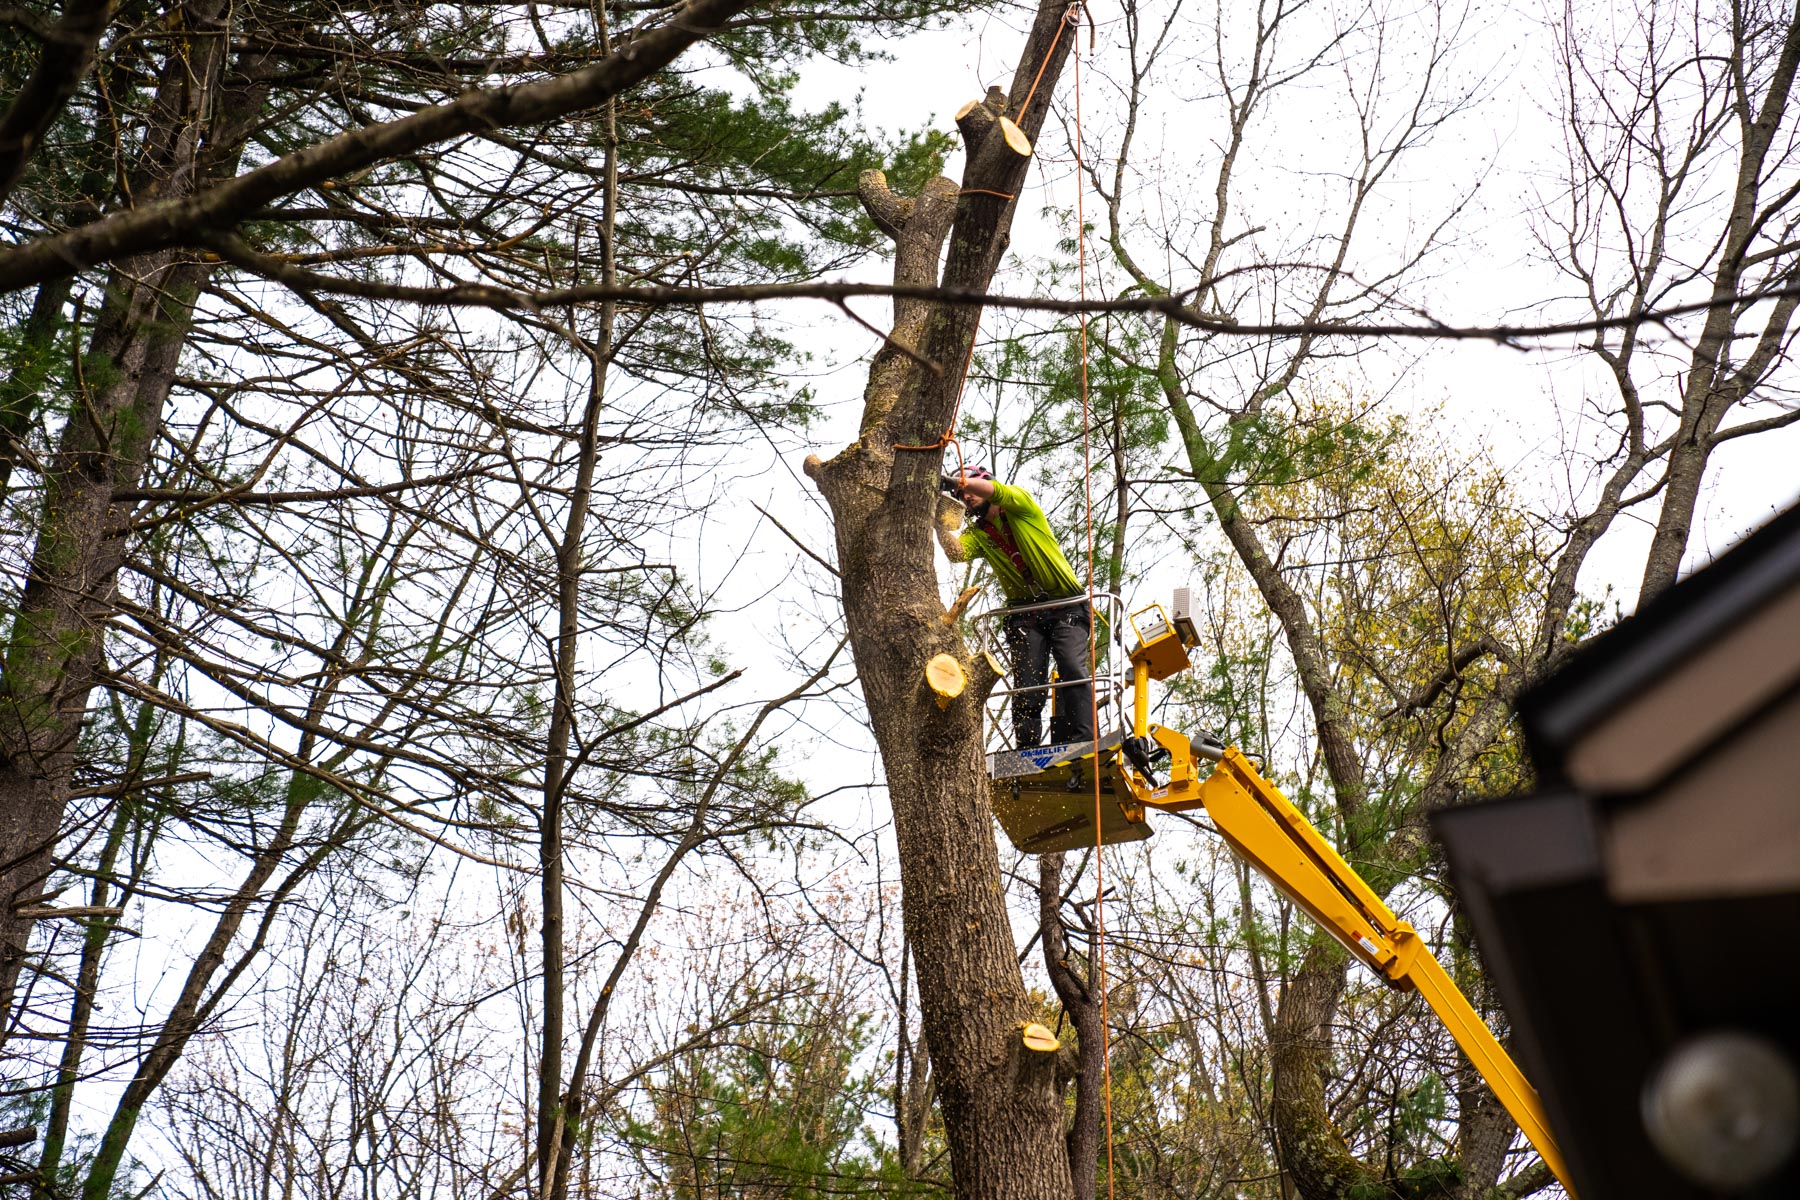 tree removal expert uses chainsaw to cut down tree